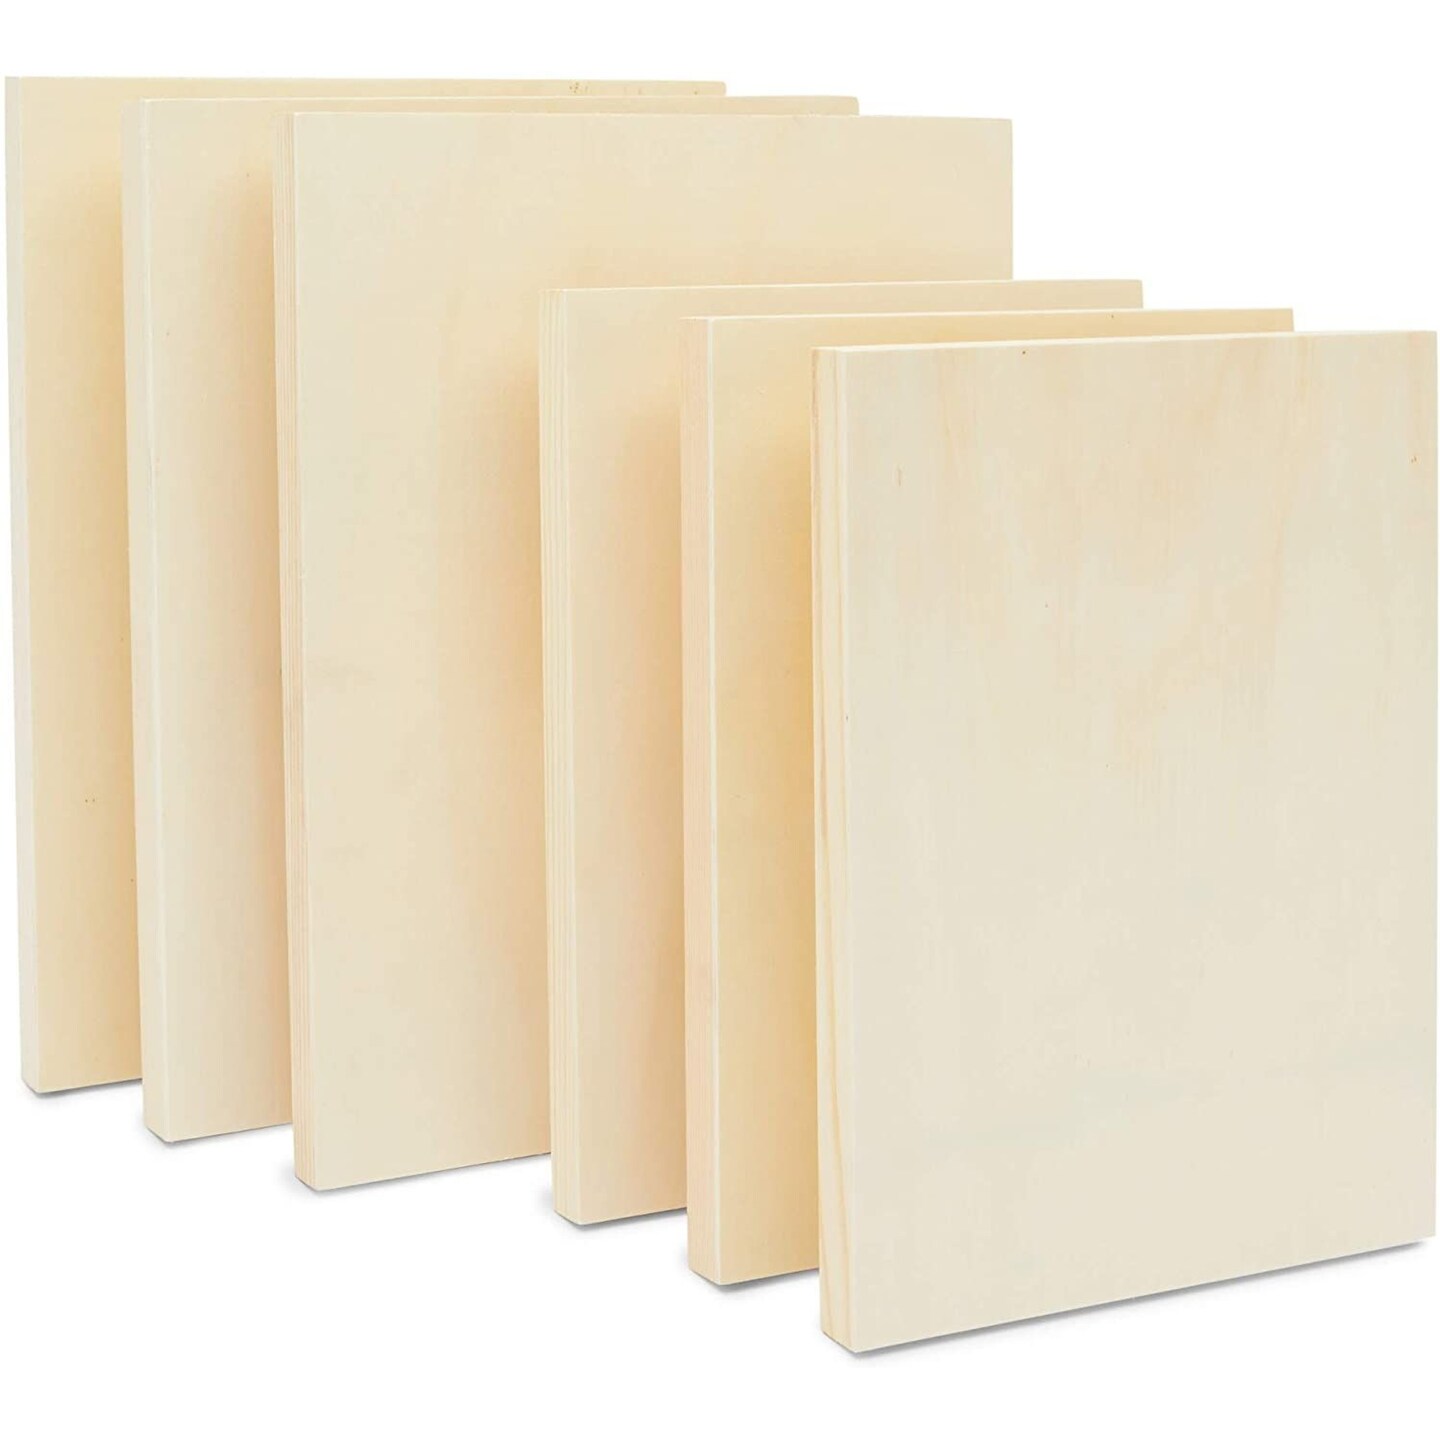 Bright Creations Unfinished Craft Wood Canvas Boards for Painting (2 Sizes, 6 Pack)